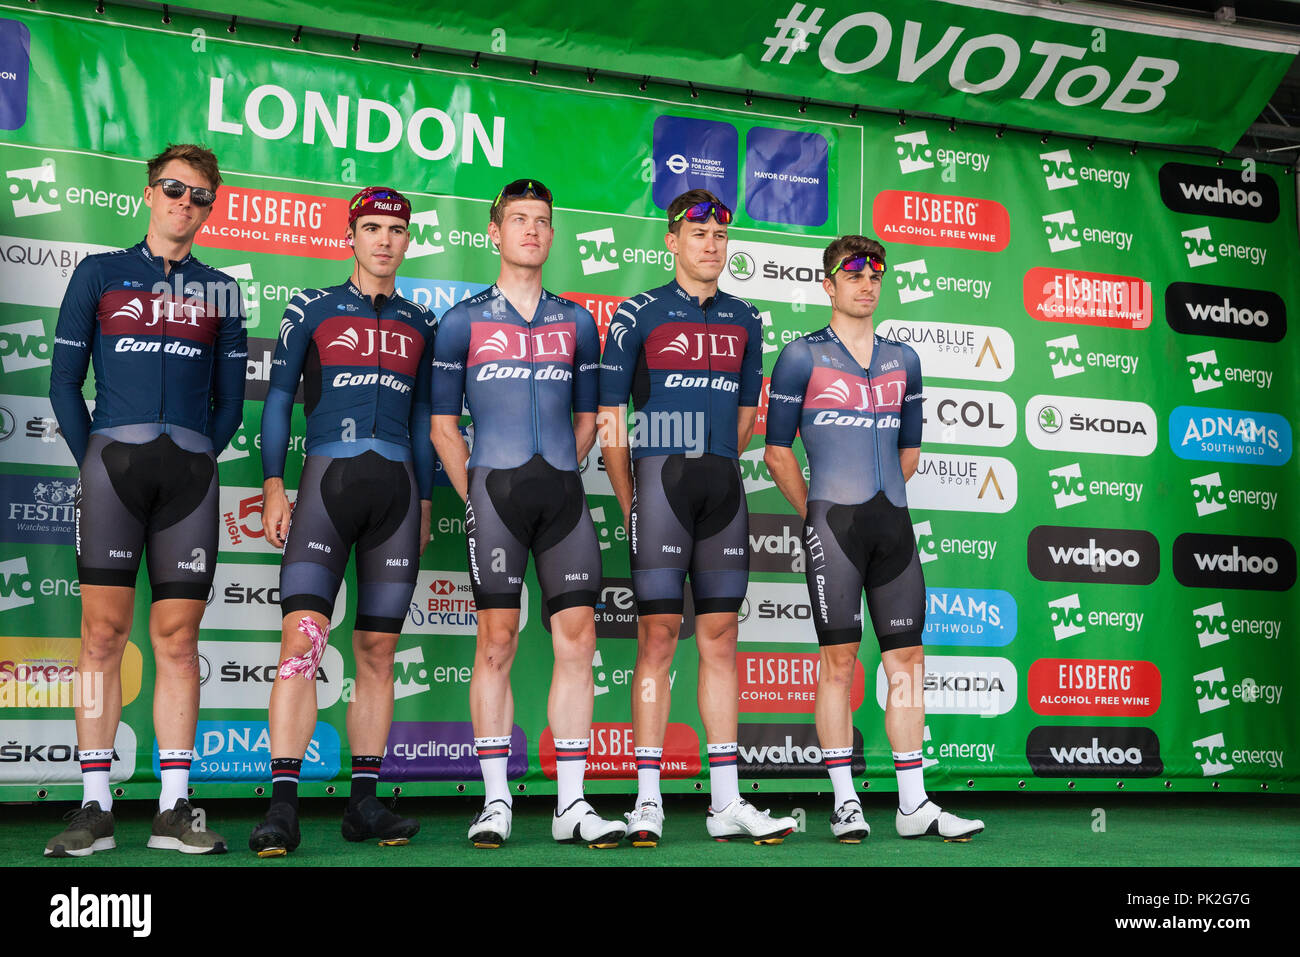 London, UK. 9th September, 2018. Riders from the JLT Condor team are presented before the 77km London Stage (Stage 8) of the OVO Energy Tour of Britain cycle race. Credit: Mark Kerrison/Alamy Live News Stock Photo